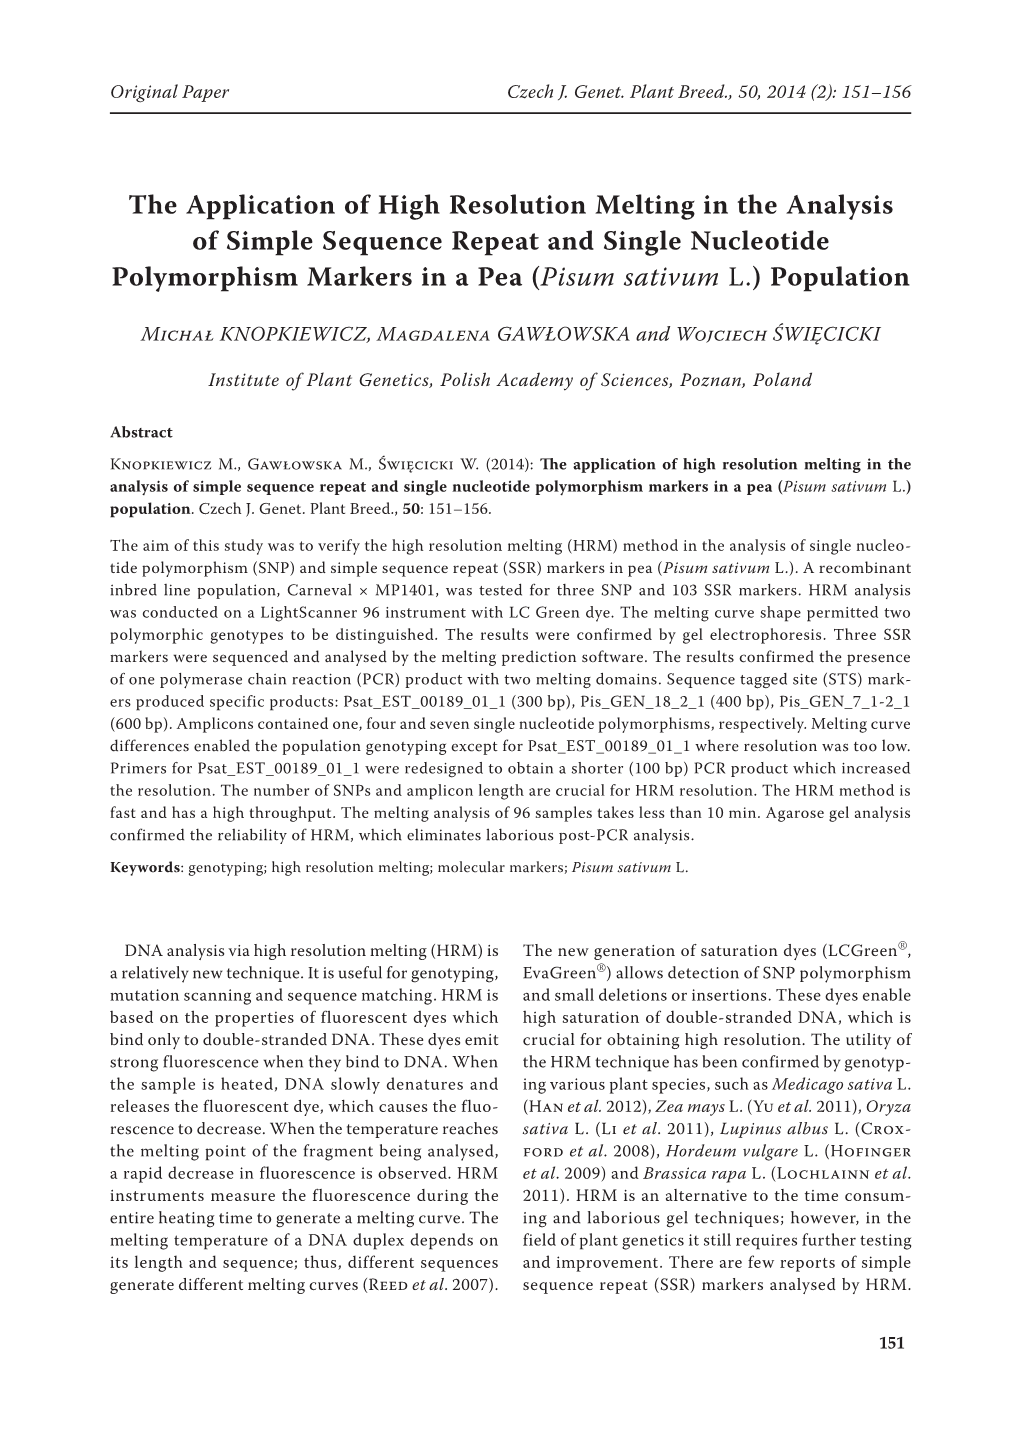 The Application of High Resolution Melting in the Analysis of Simple Sequence Repeat and Single Nucleotide Polymorphism Markers in a Pea (Pisum Sativum L.) Population